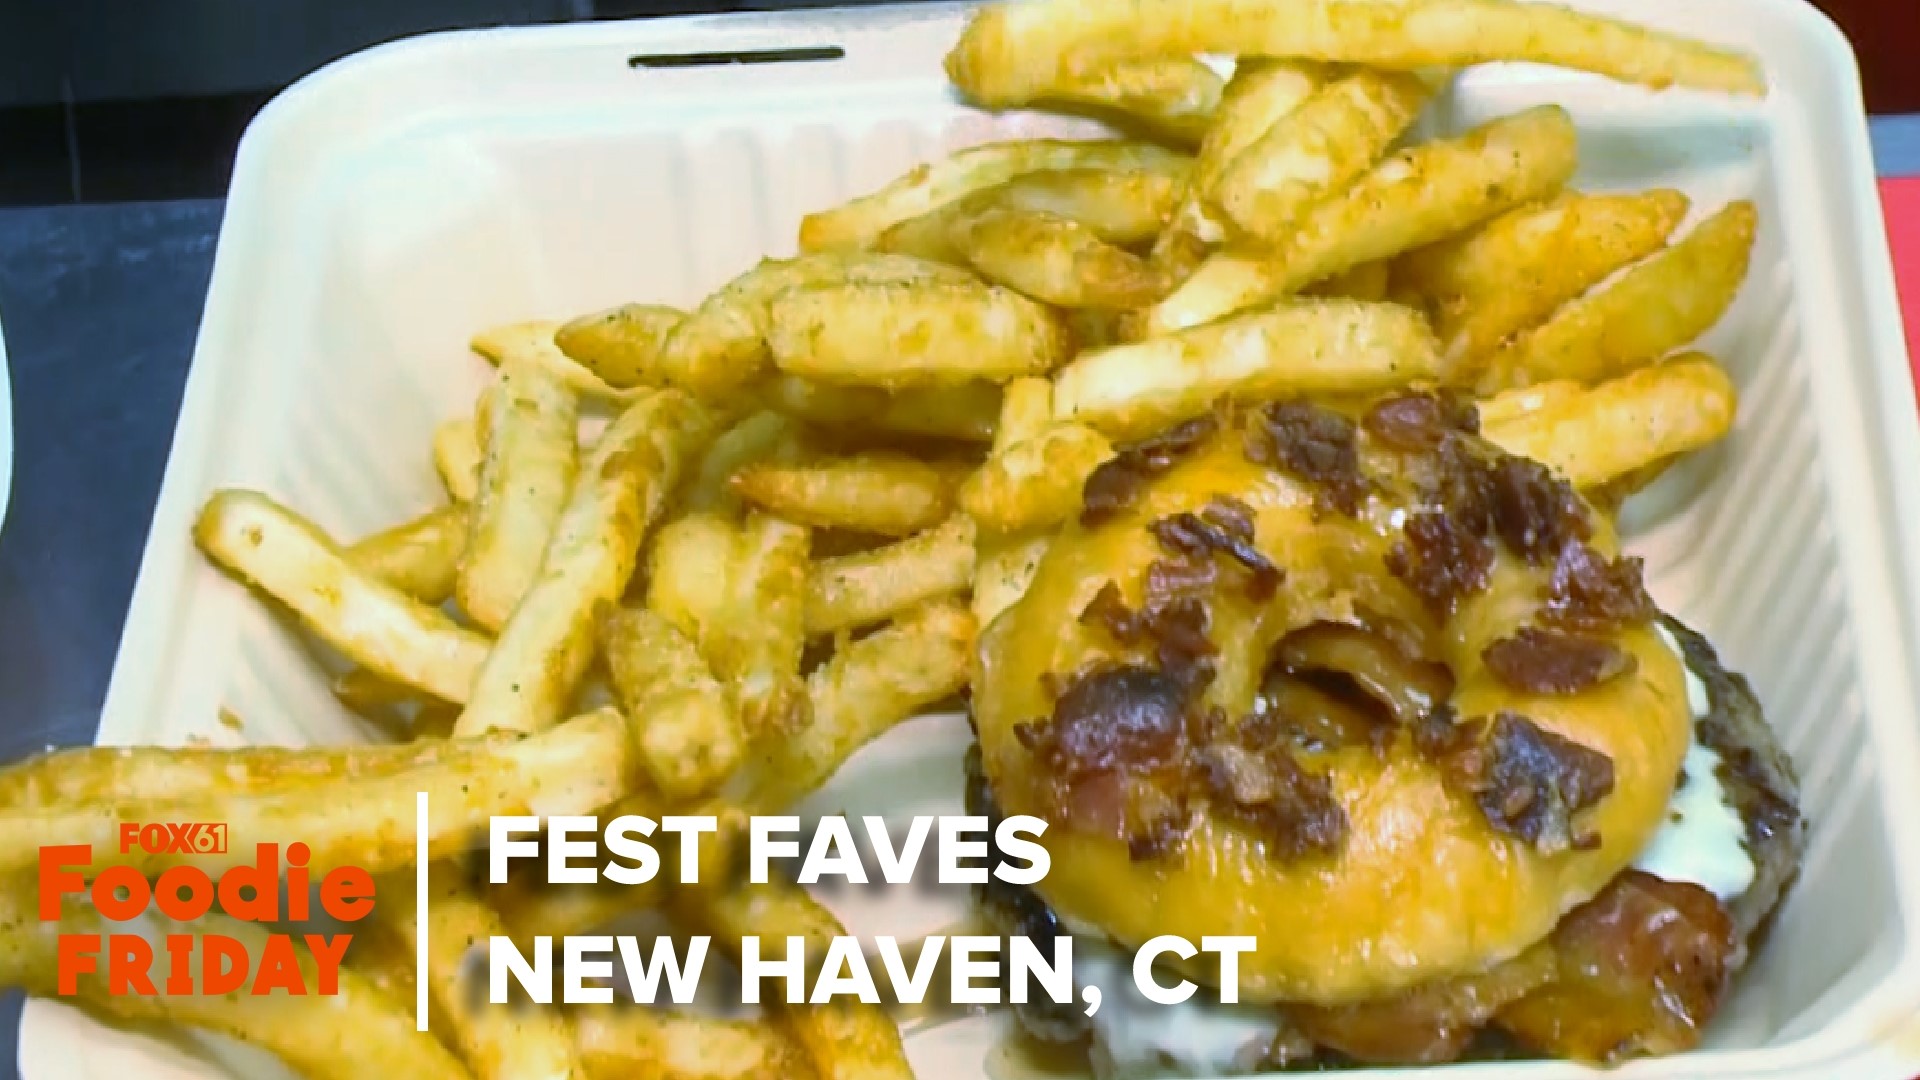 Missing those sweet and savory treats from spring carnivals and fall fairs? Fest Faves in New Haven has it all. FOX61's Matt Scott visited them for Foodie Friday.